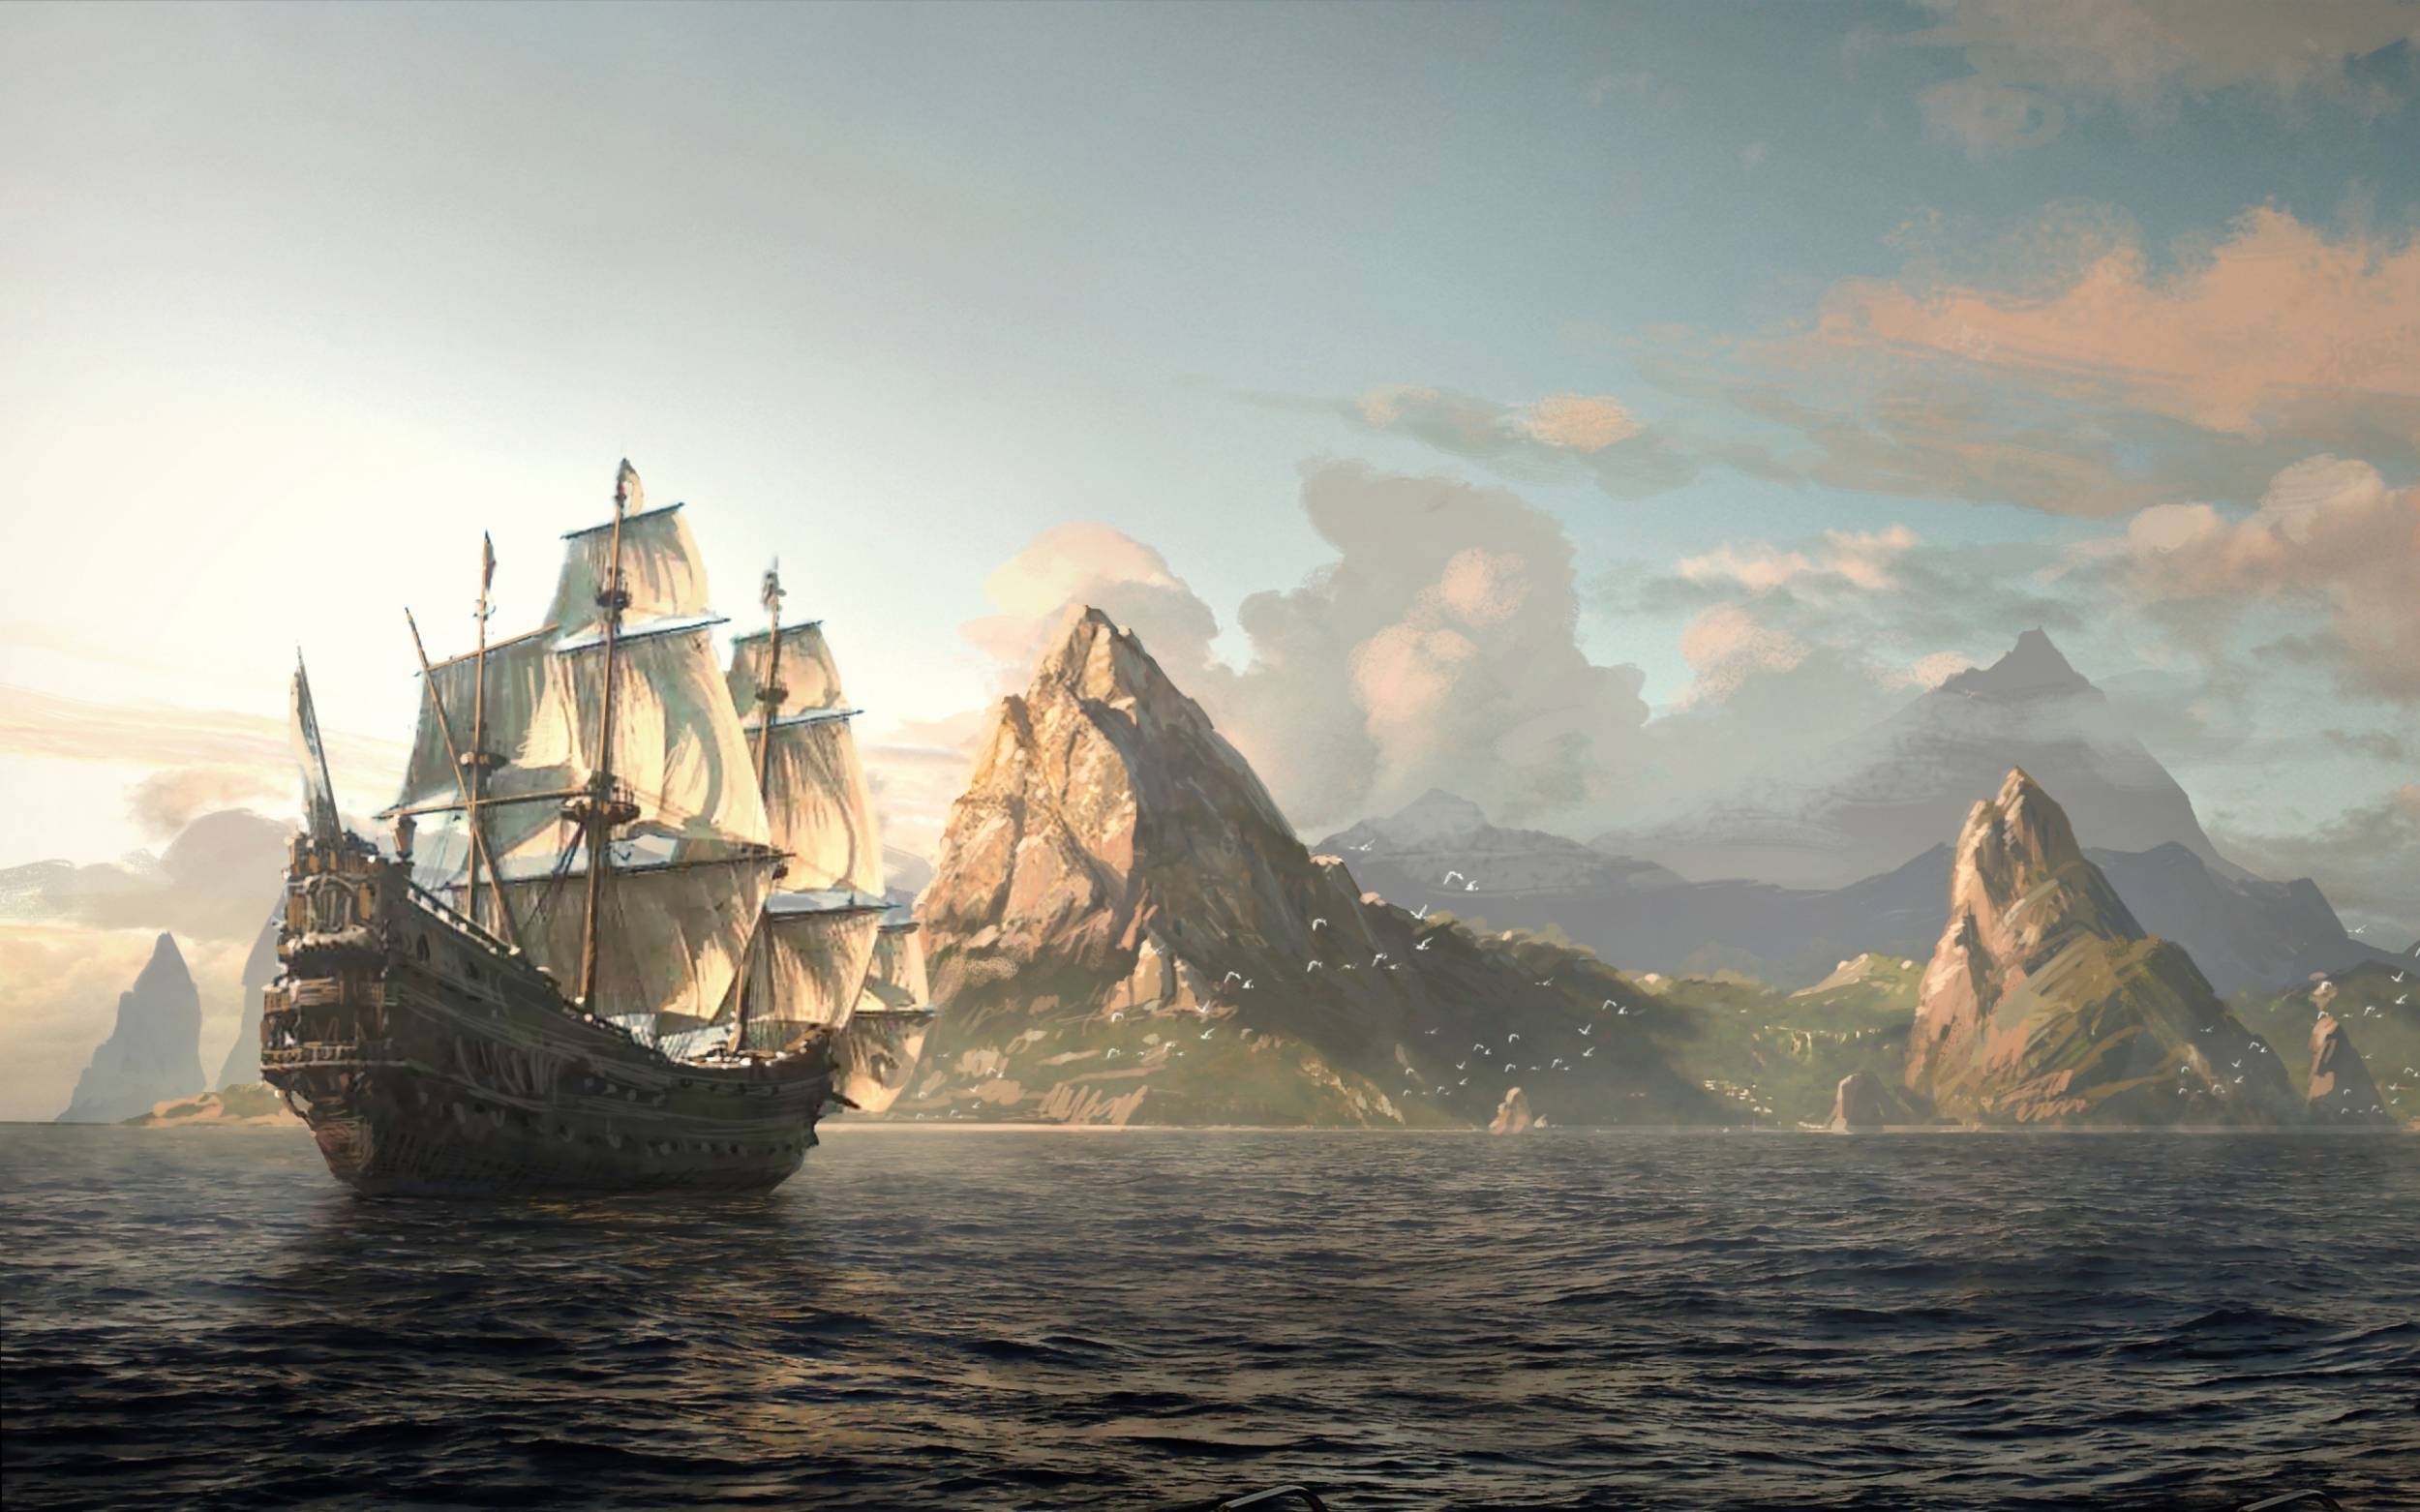 10 Latest Pirate Ship Hd Wallpaper Full Hd 1920×1080 For Pc Background 2020